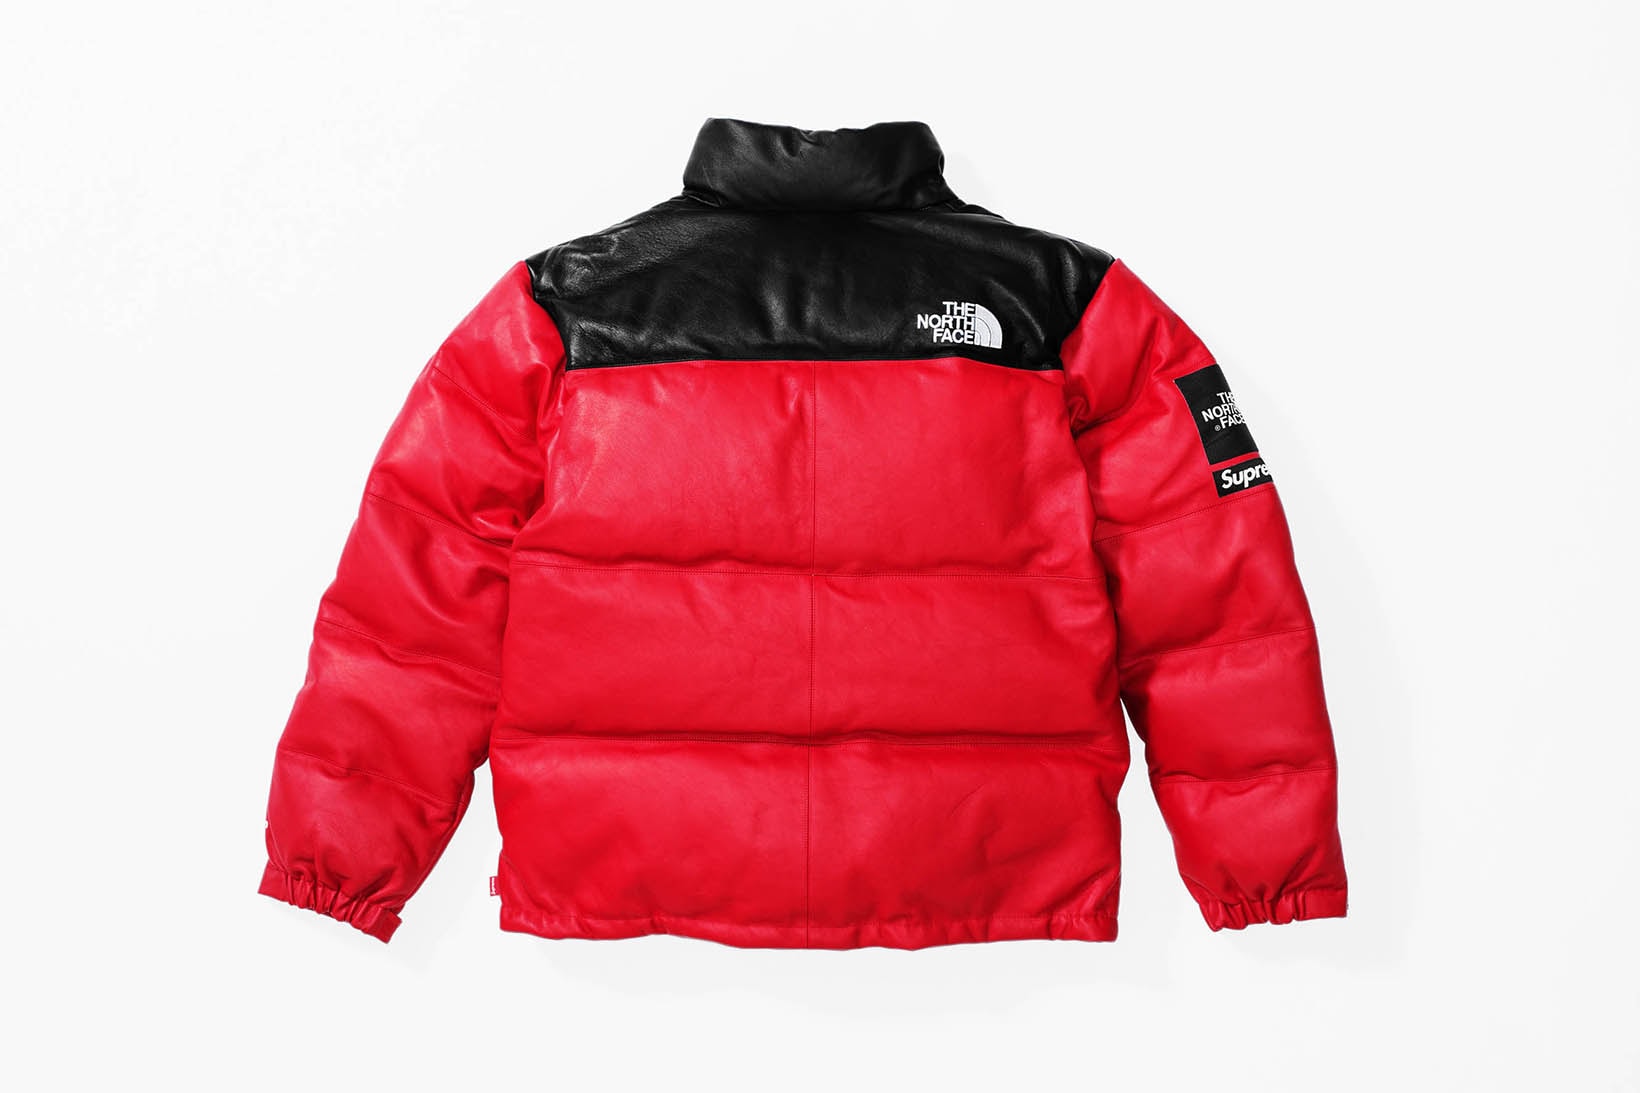 Supreme x The North Face 2017 Fall Red Jacket